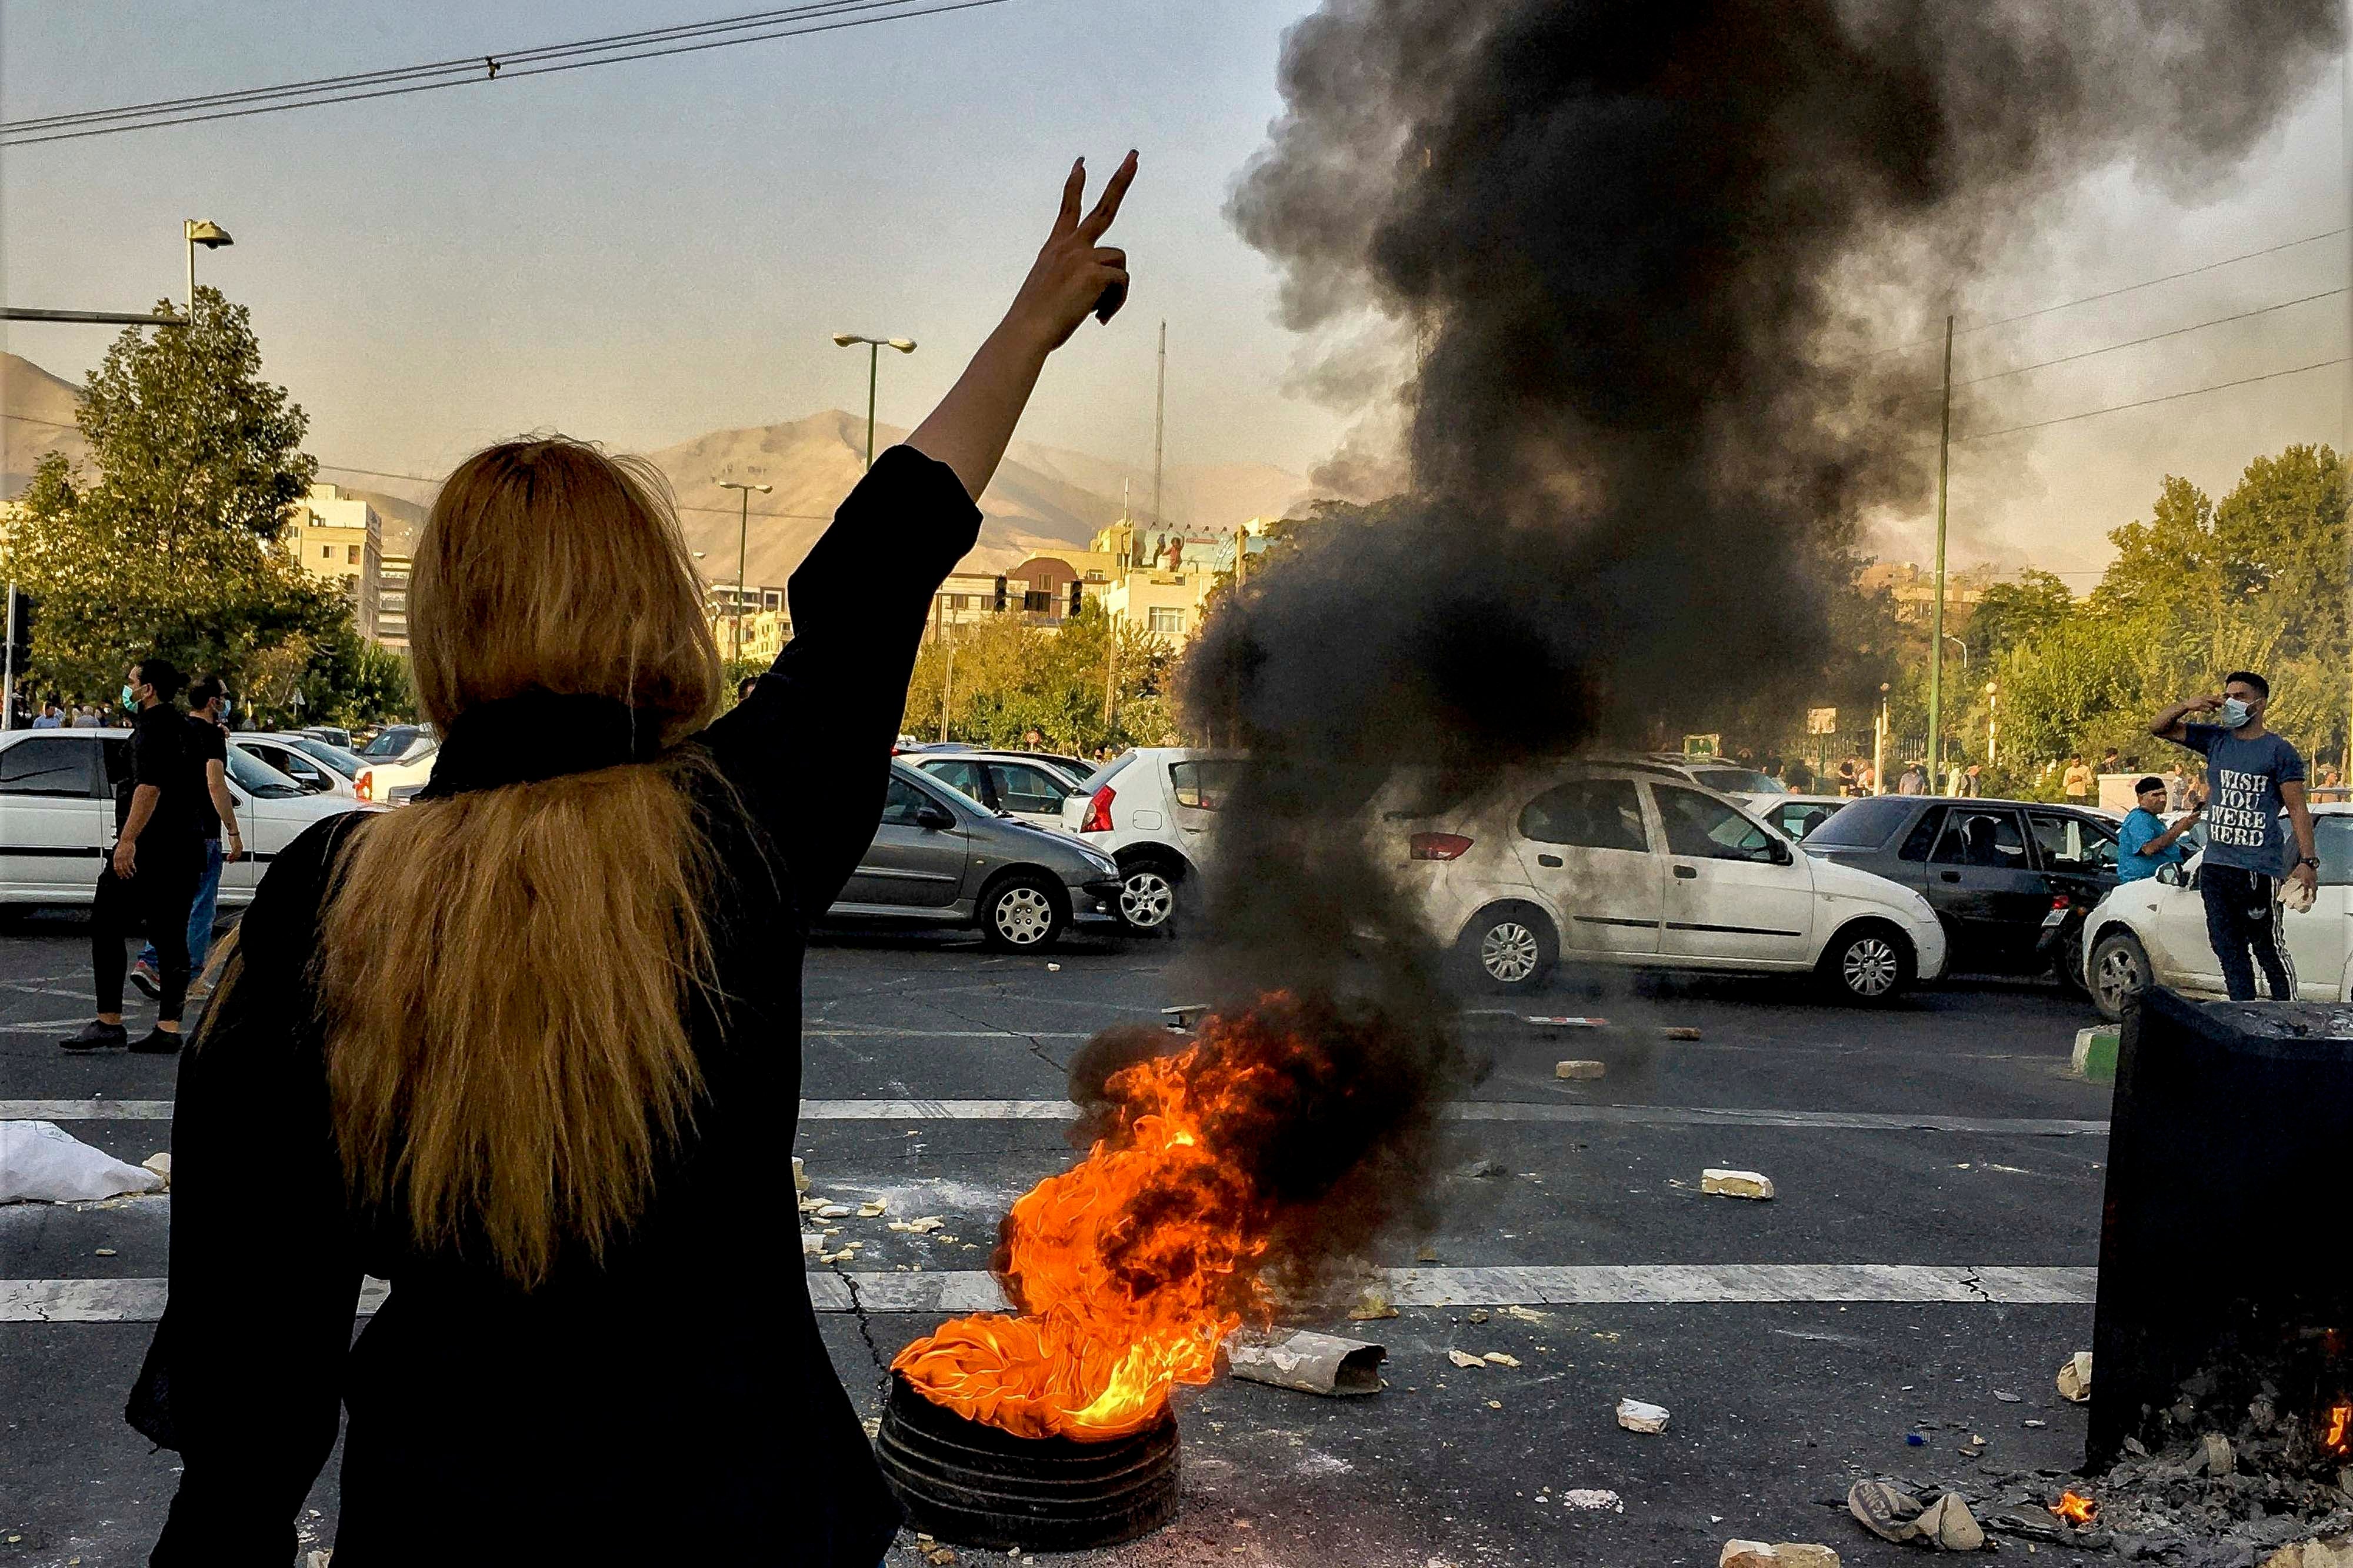 Iranians protests the death of 22-year-old Mahsa Amini after she was detained by the morality police, in Tehran, October 1, 2022.